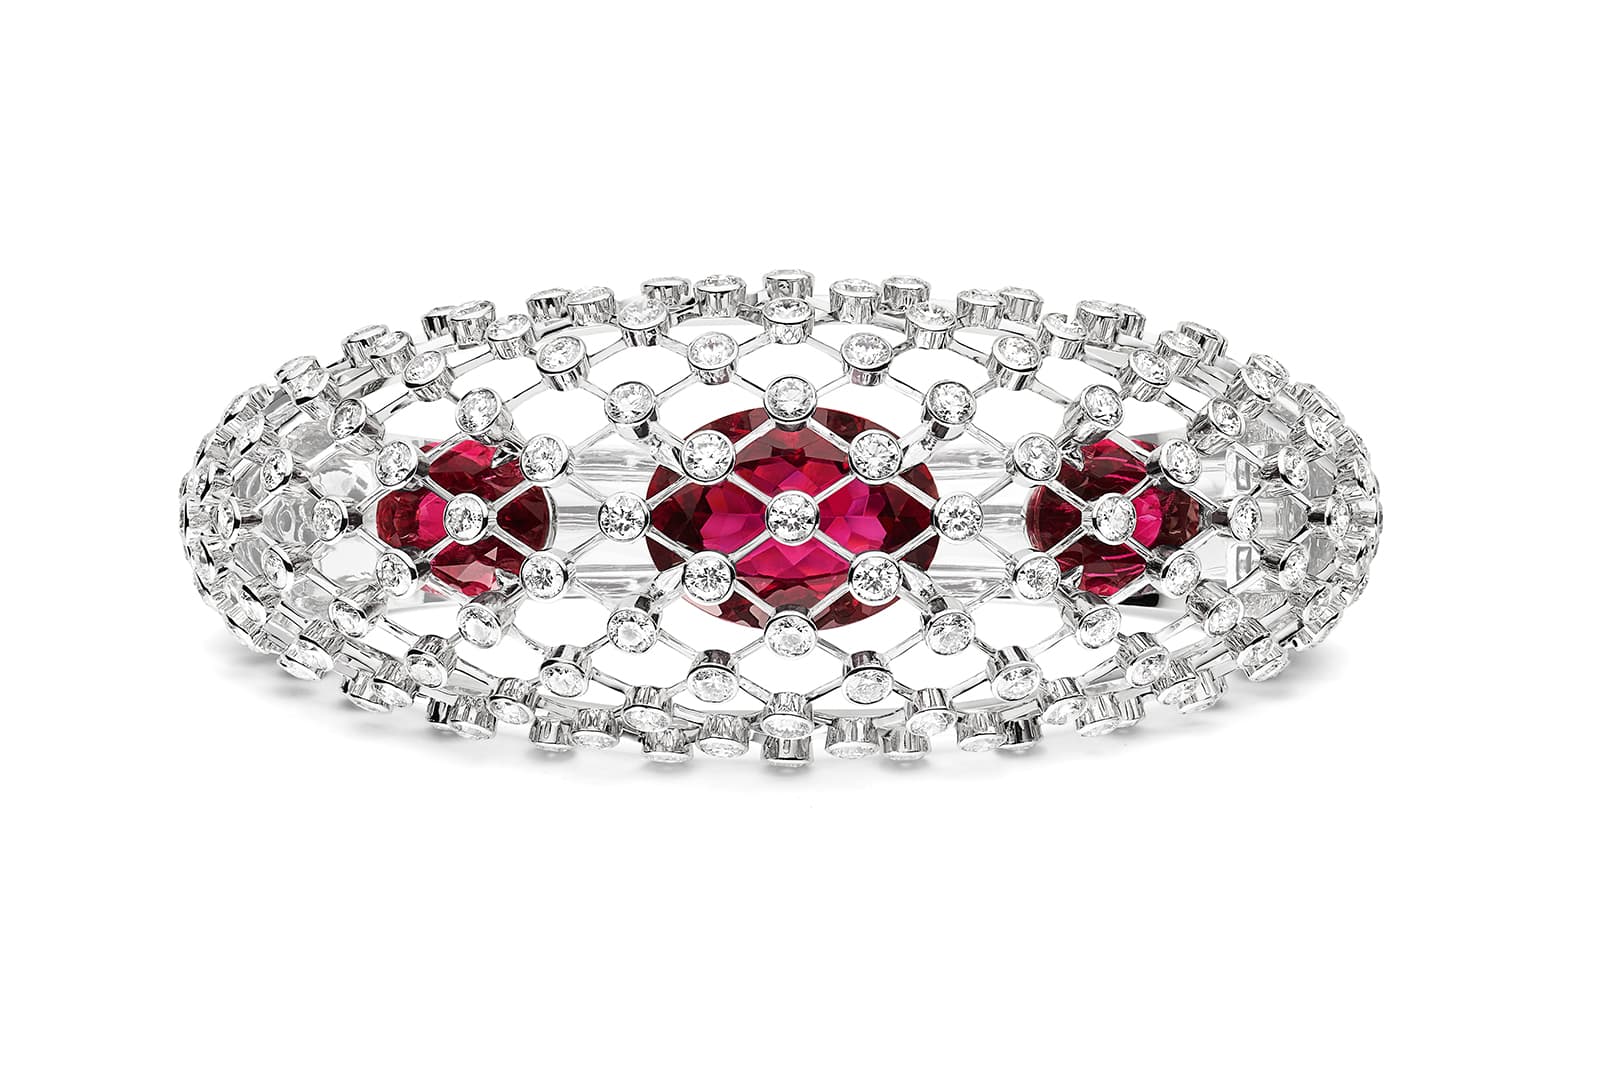 Chaumet est une fête: a virtuoso performance in high jewellery